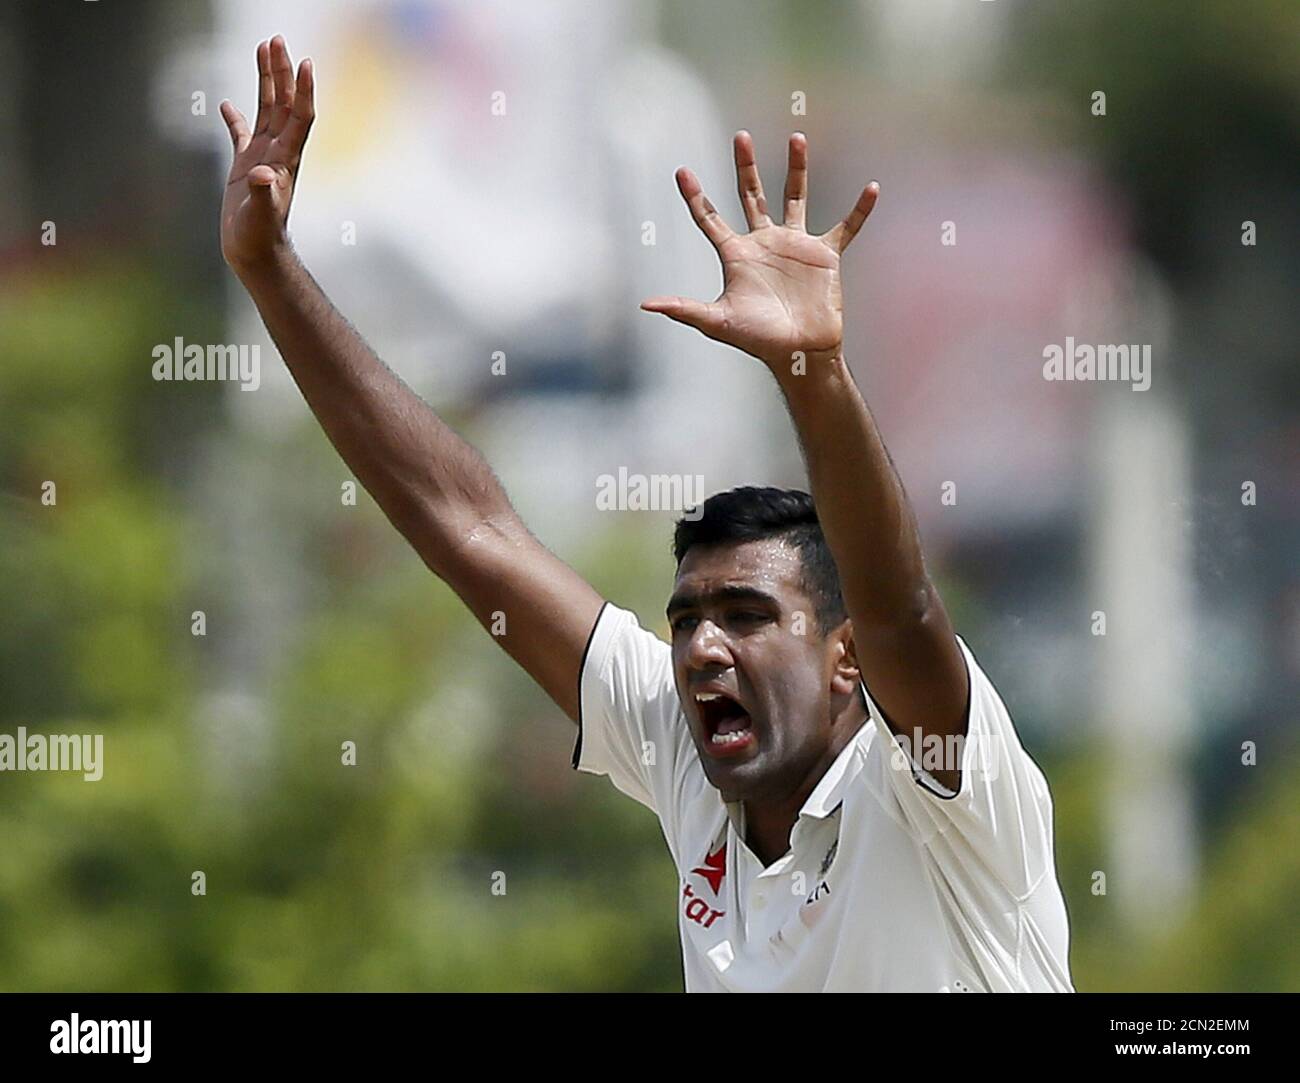 India's Ravichandran Ashwin appeals for an unsuccessful wicket of Sri Lanka Dinesh Chandimal (not pictured) during the first day of their first test cricket match in Galle, August 12, 2015. REUTERS/Dinuka Liyanawatte Stock Photo